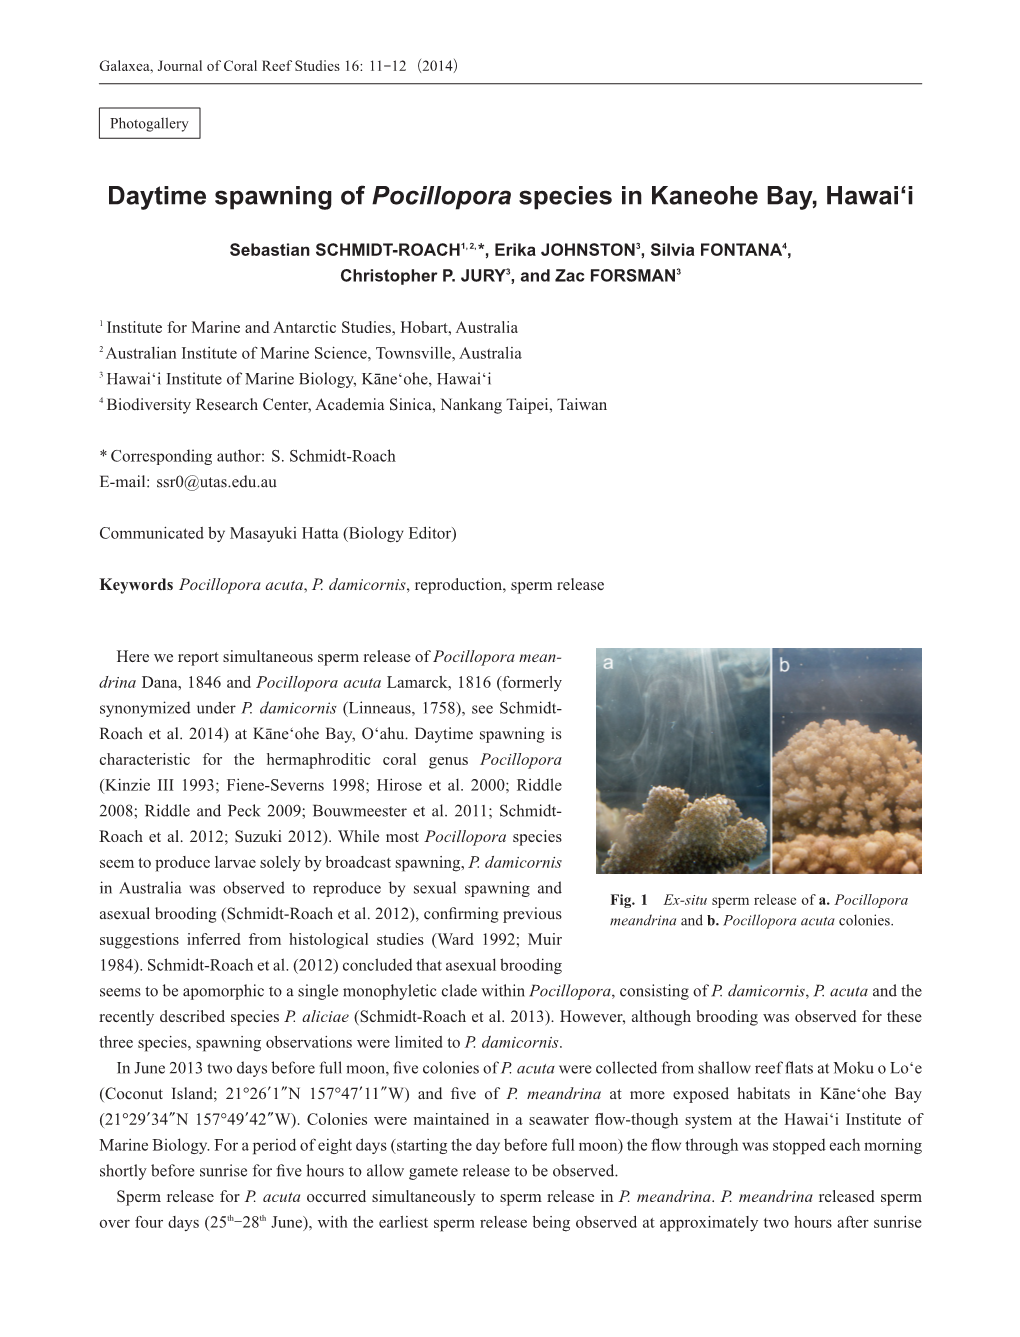 Daytime Spawning of Pocillopora Species in Kaneohe Bay, Hawai'i